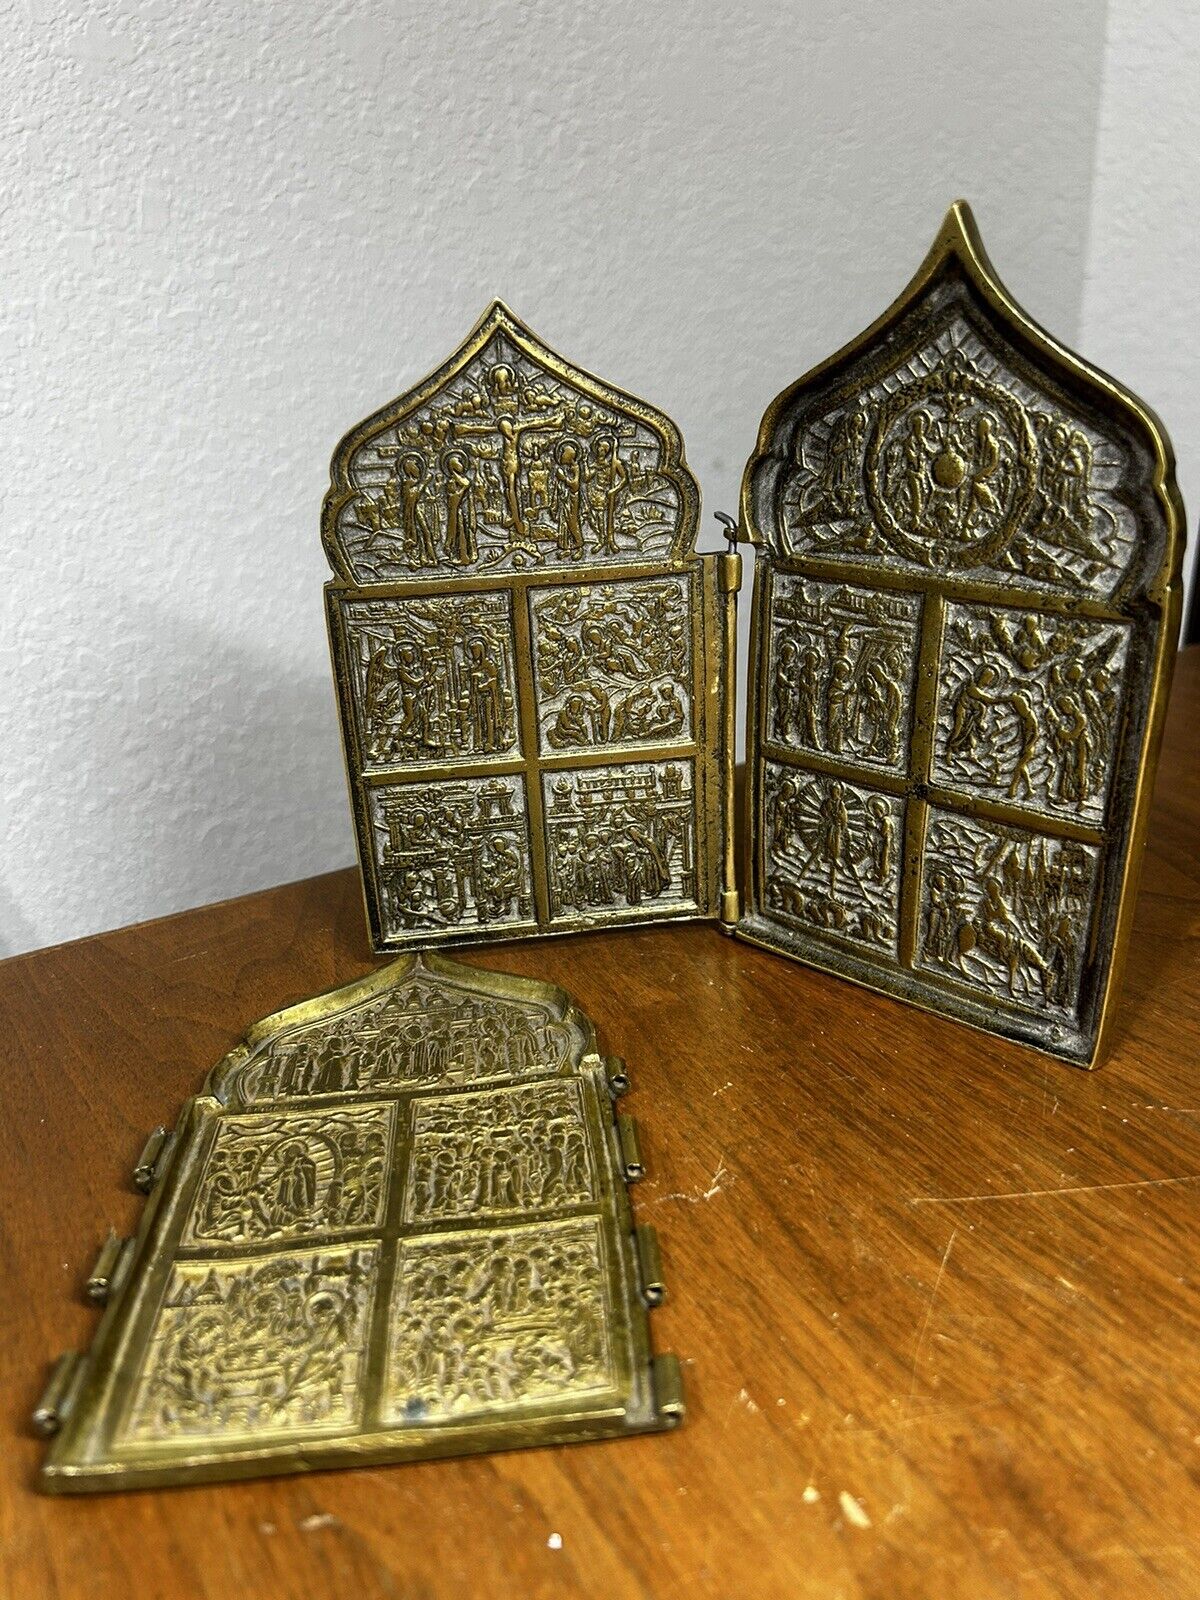 ANTIQUE RUSSIAN 19th C BRONZE FOLDING TRAVEL ICON 3 PARTS POLYPTYCH